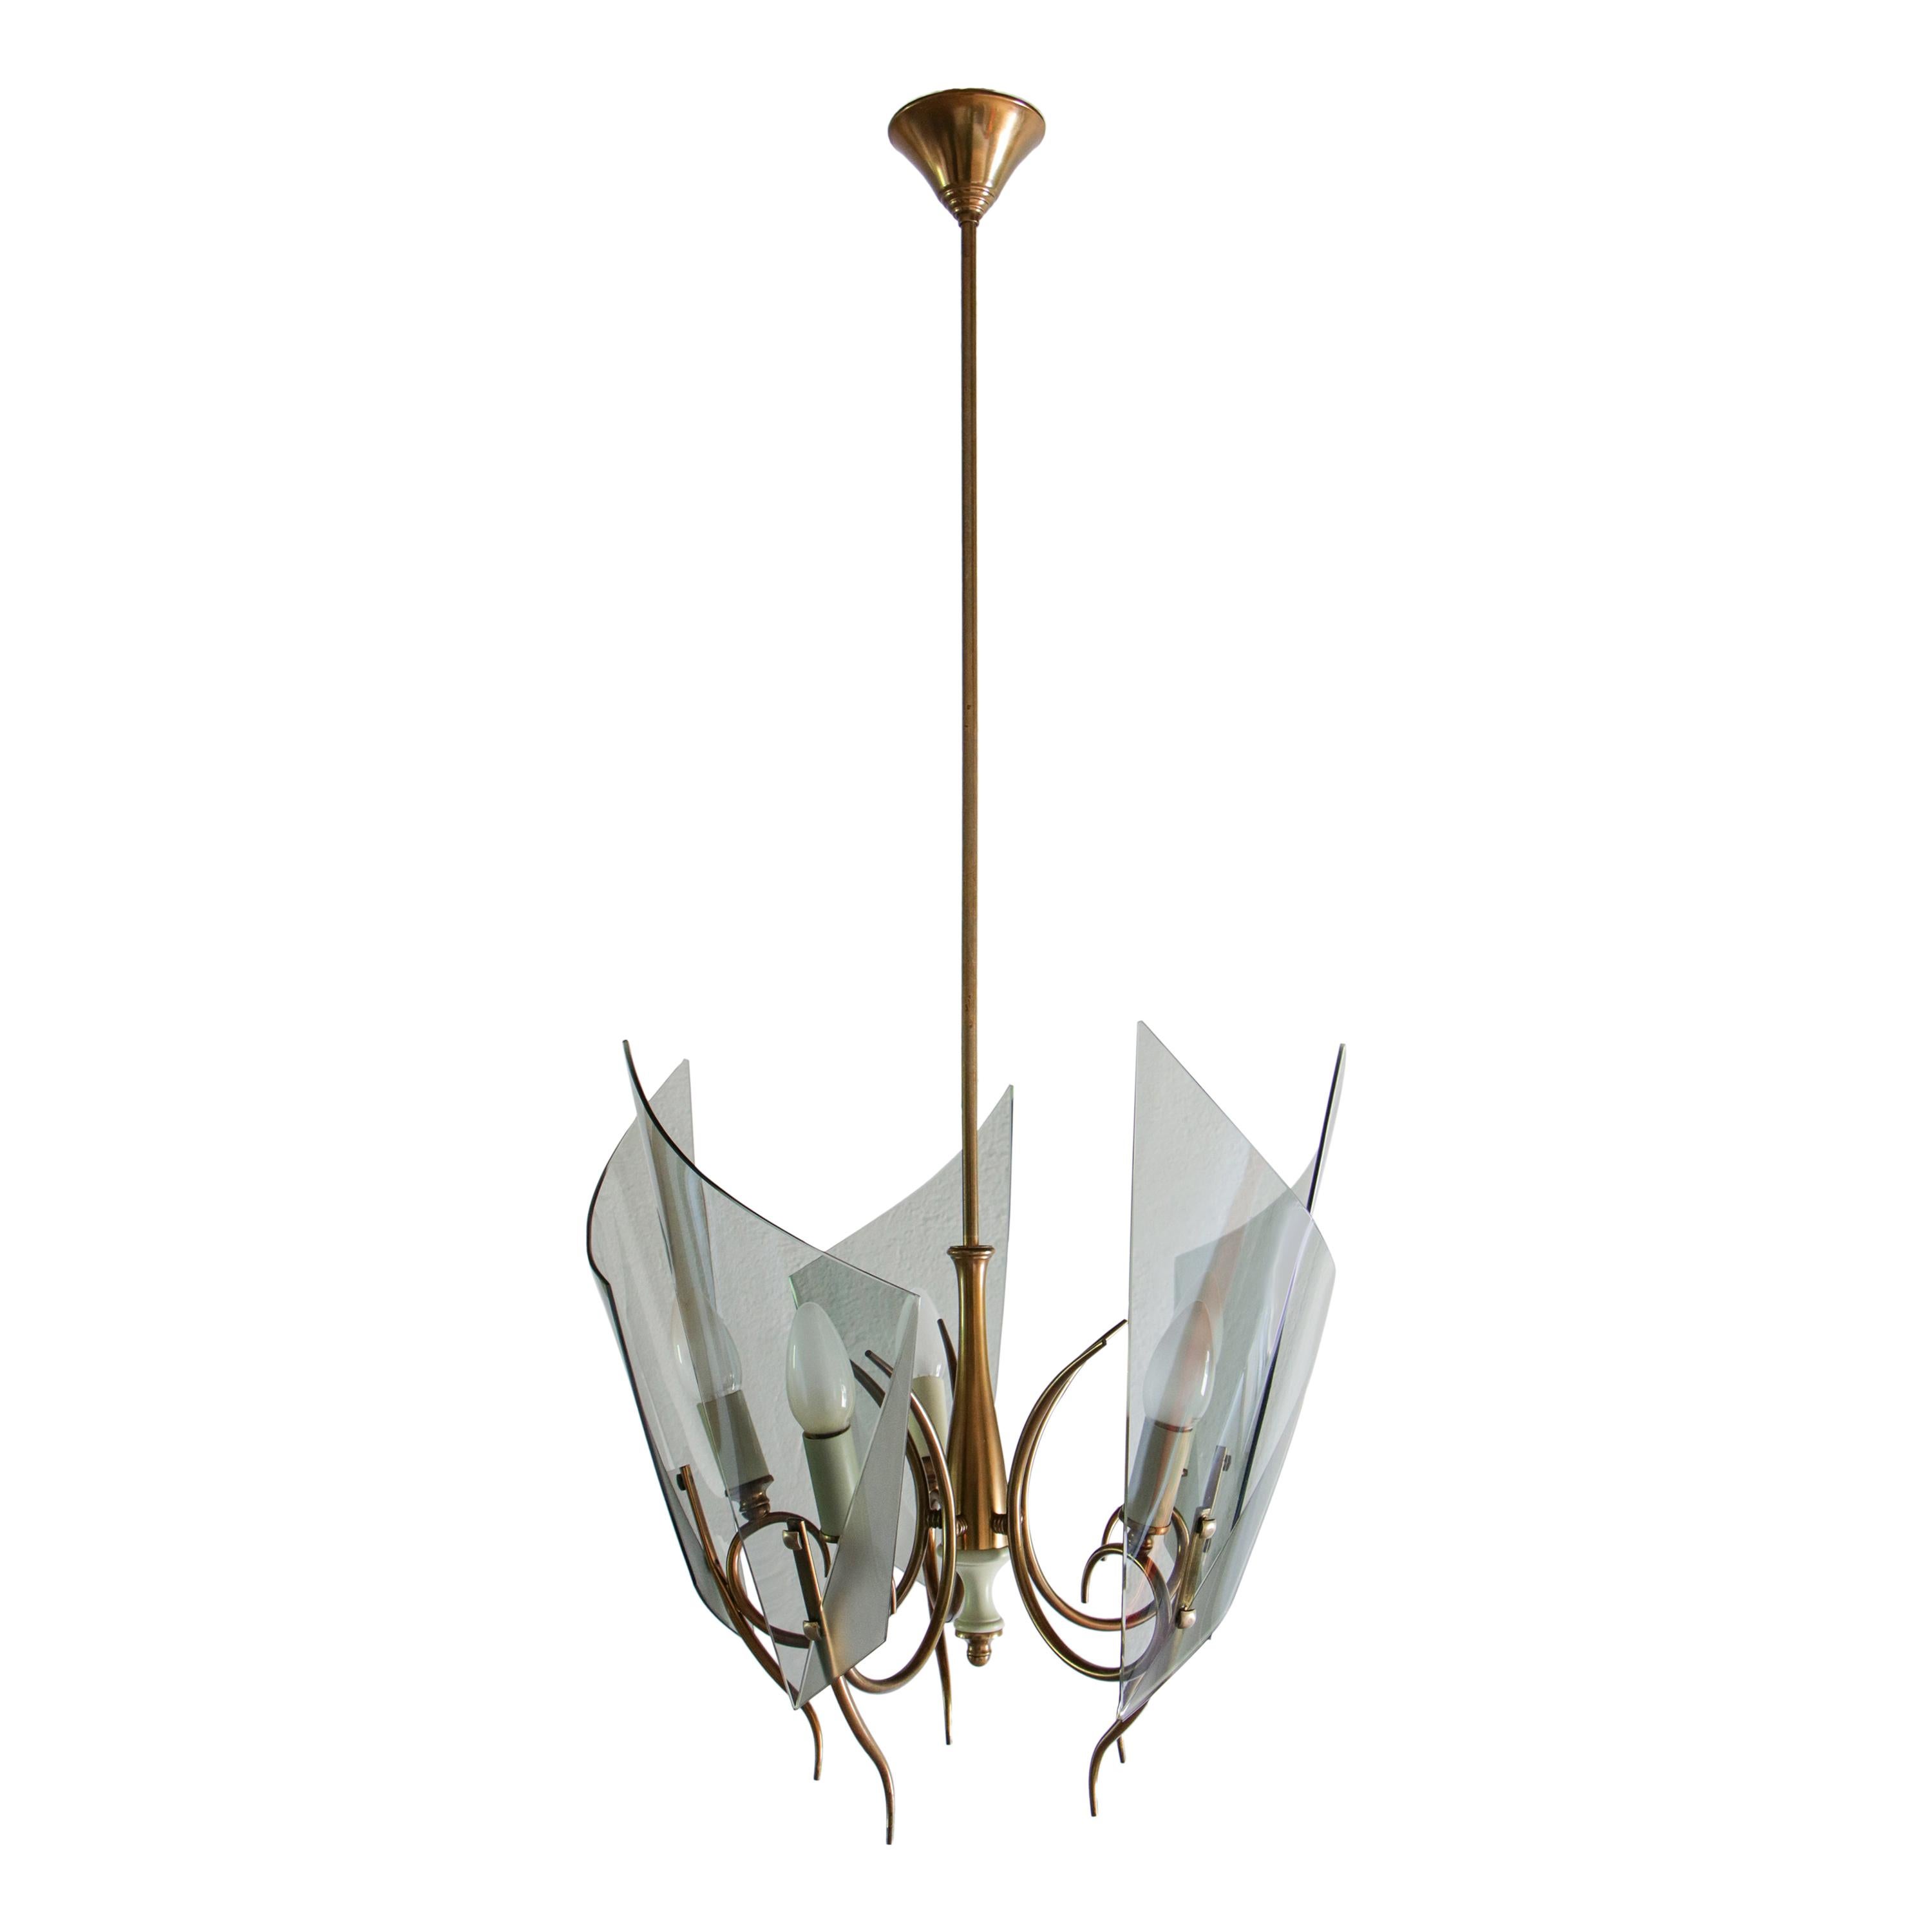 Italian Mid-Century Curved Glass Chandelier Attributed to Fontana Arte, 1950s